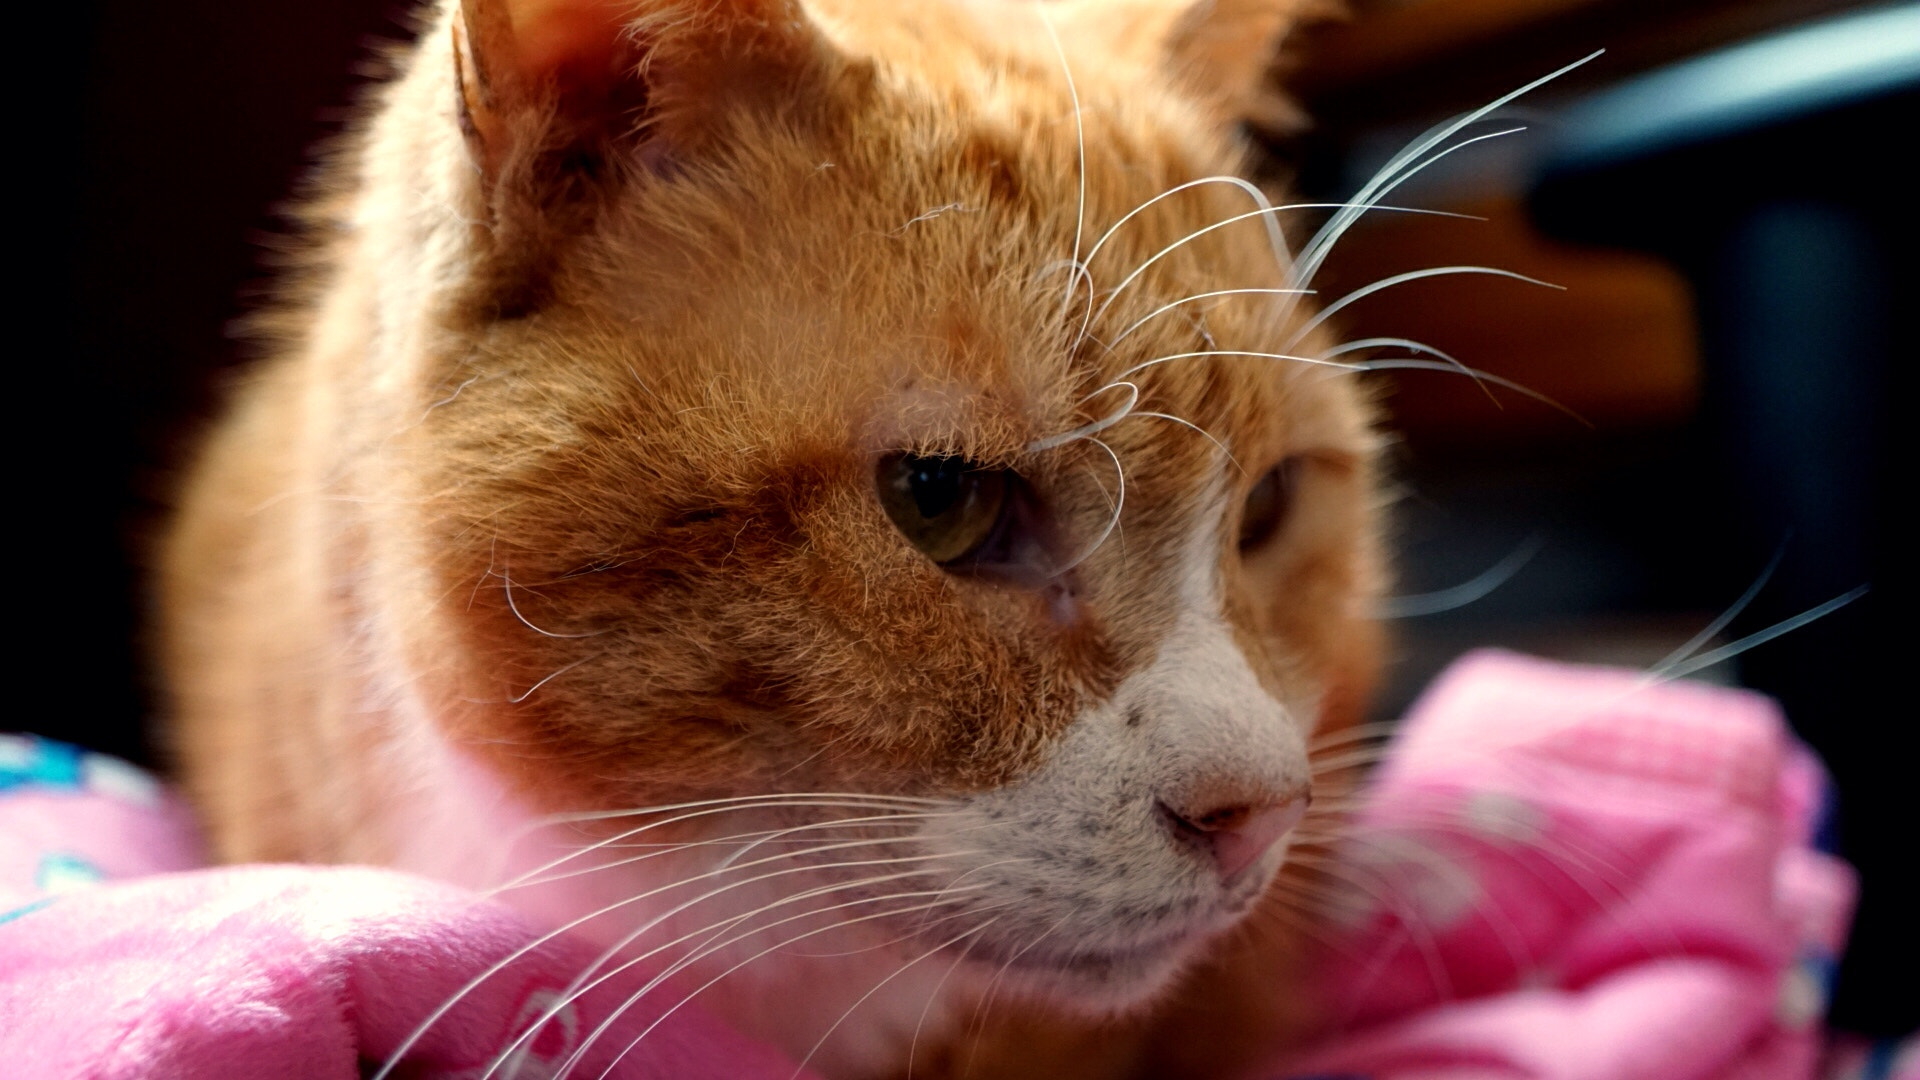 Sony E 30mm F3.5 sample photo. Their domesticated a cat photography